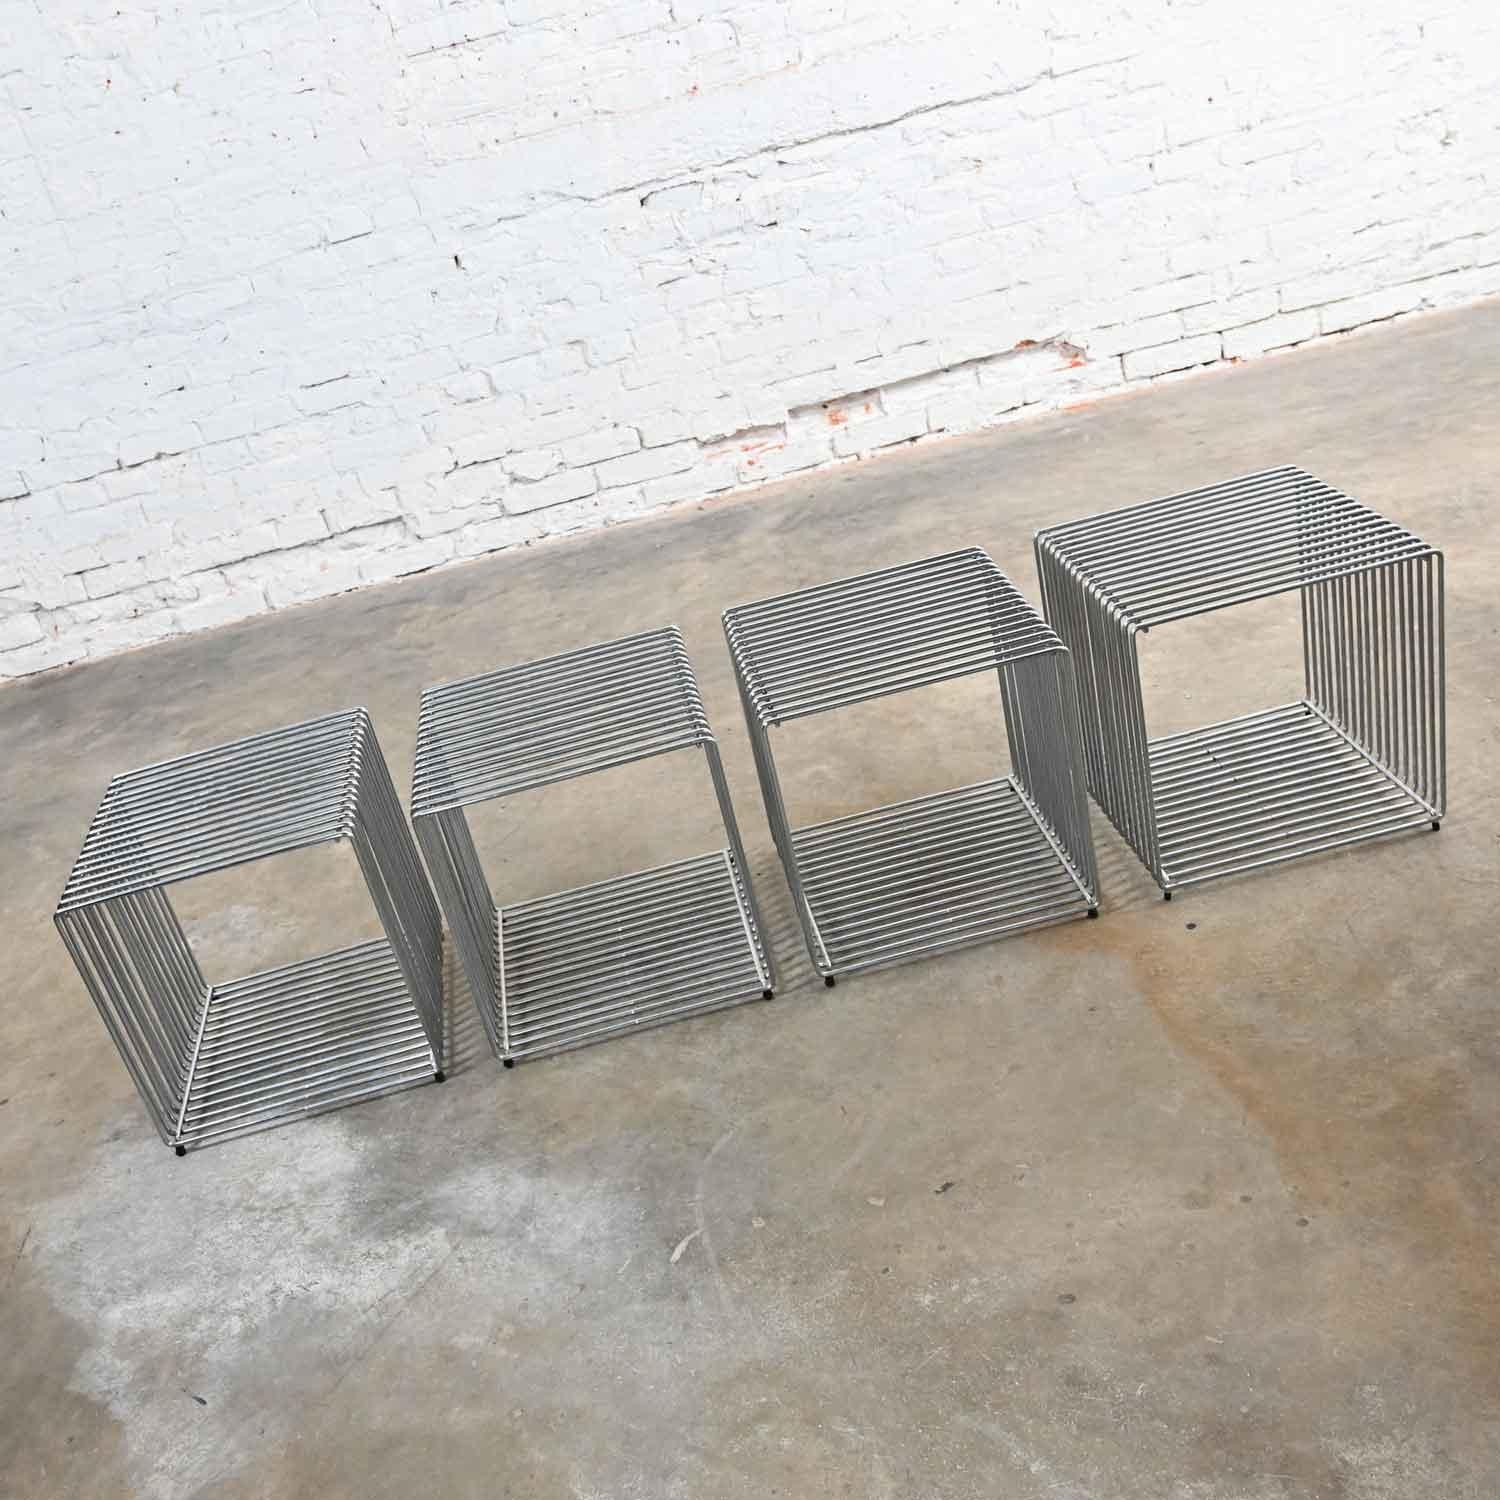 Iconic vintage modern set of four chrome wire Pantonova cubes by Verner Panton. These have been attributed based upon archived research including online sources, vintage documentation and catalogs, designer literature, and other materials. Beautiful